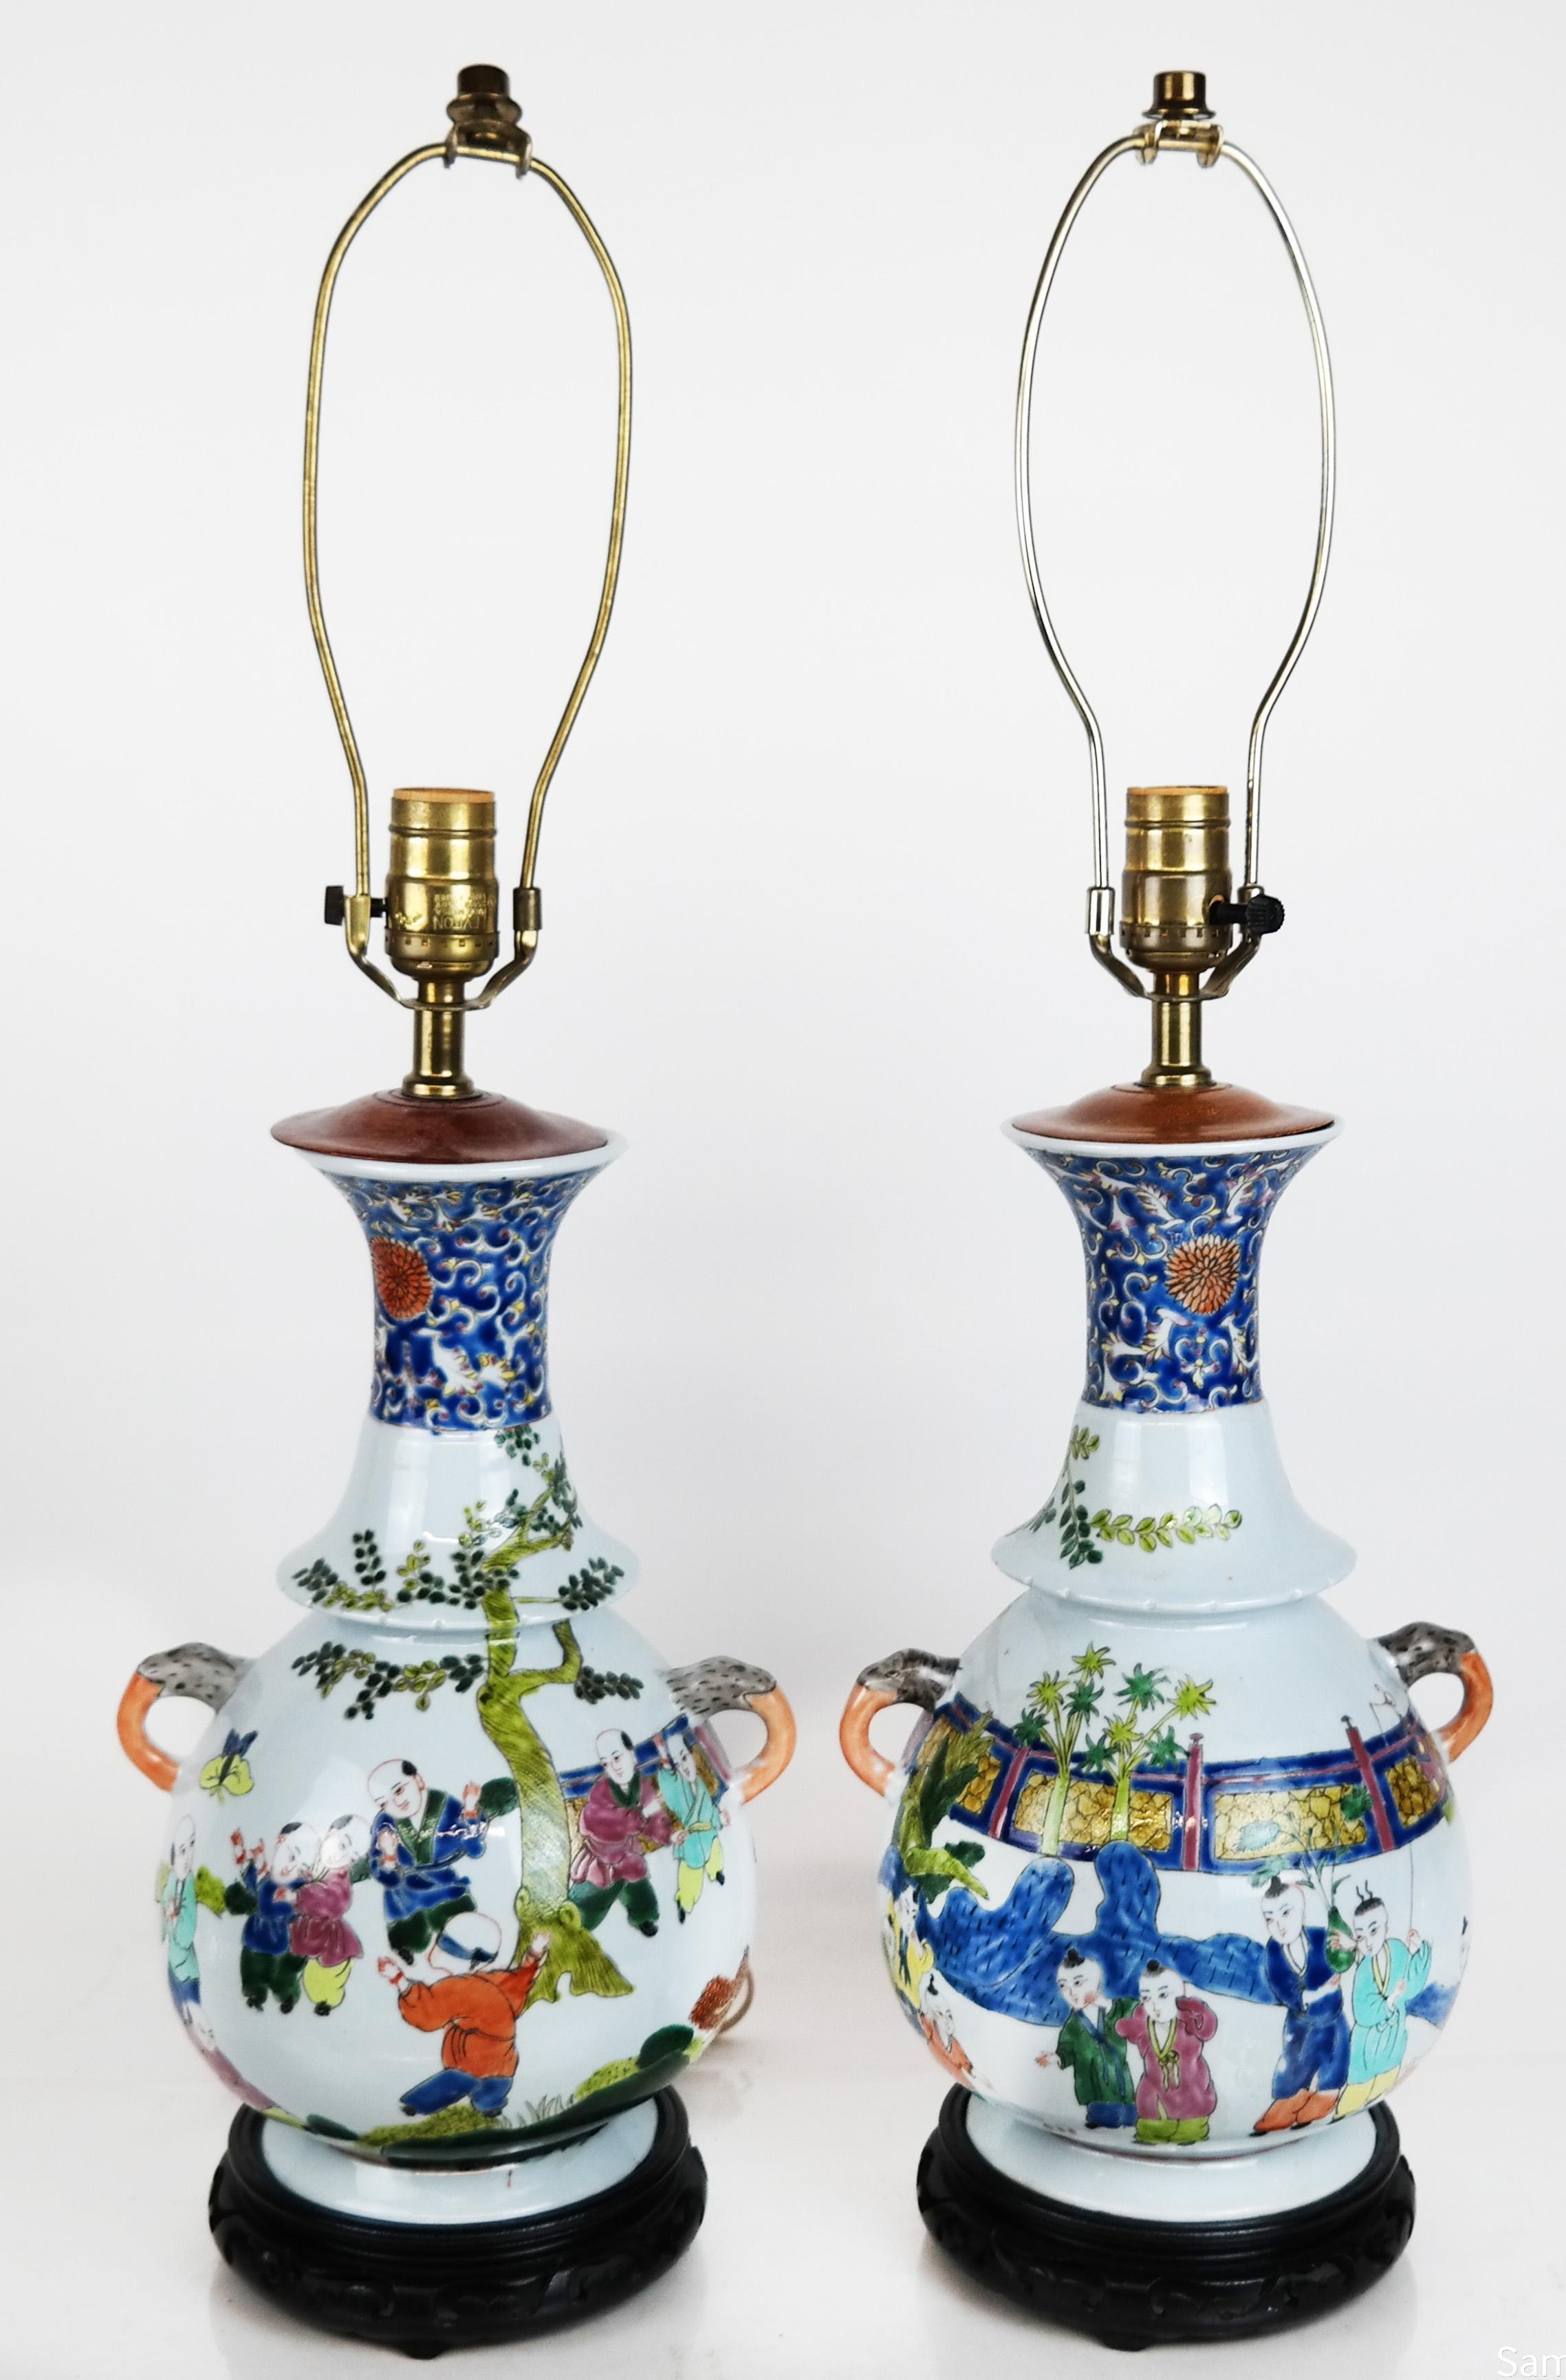 A pair of Chinese polychrome porcelain lamps with handles on each side and colorful figural scene.